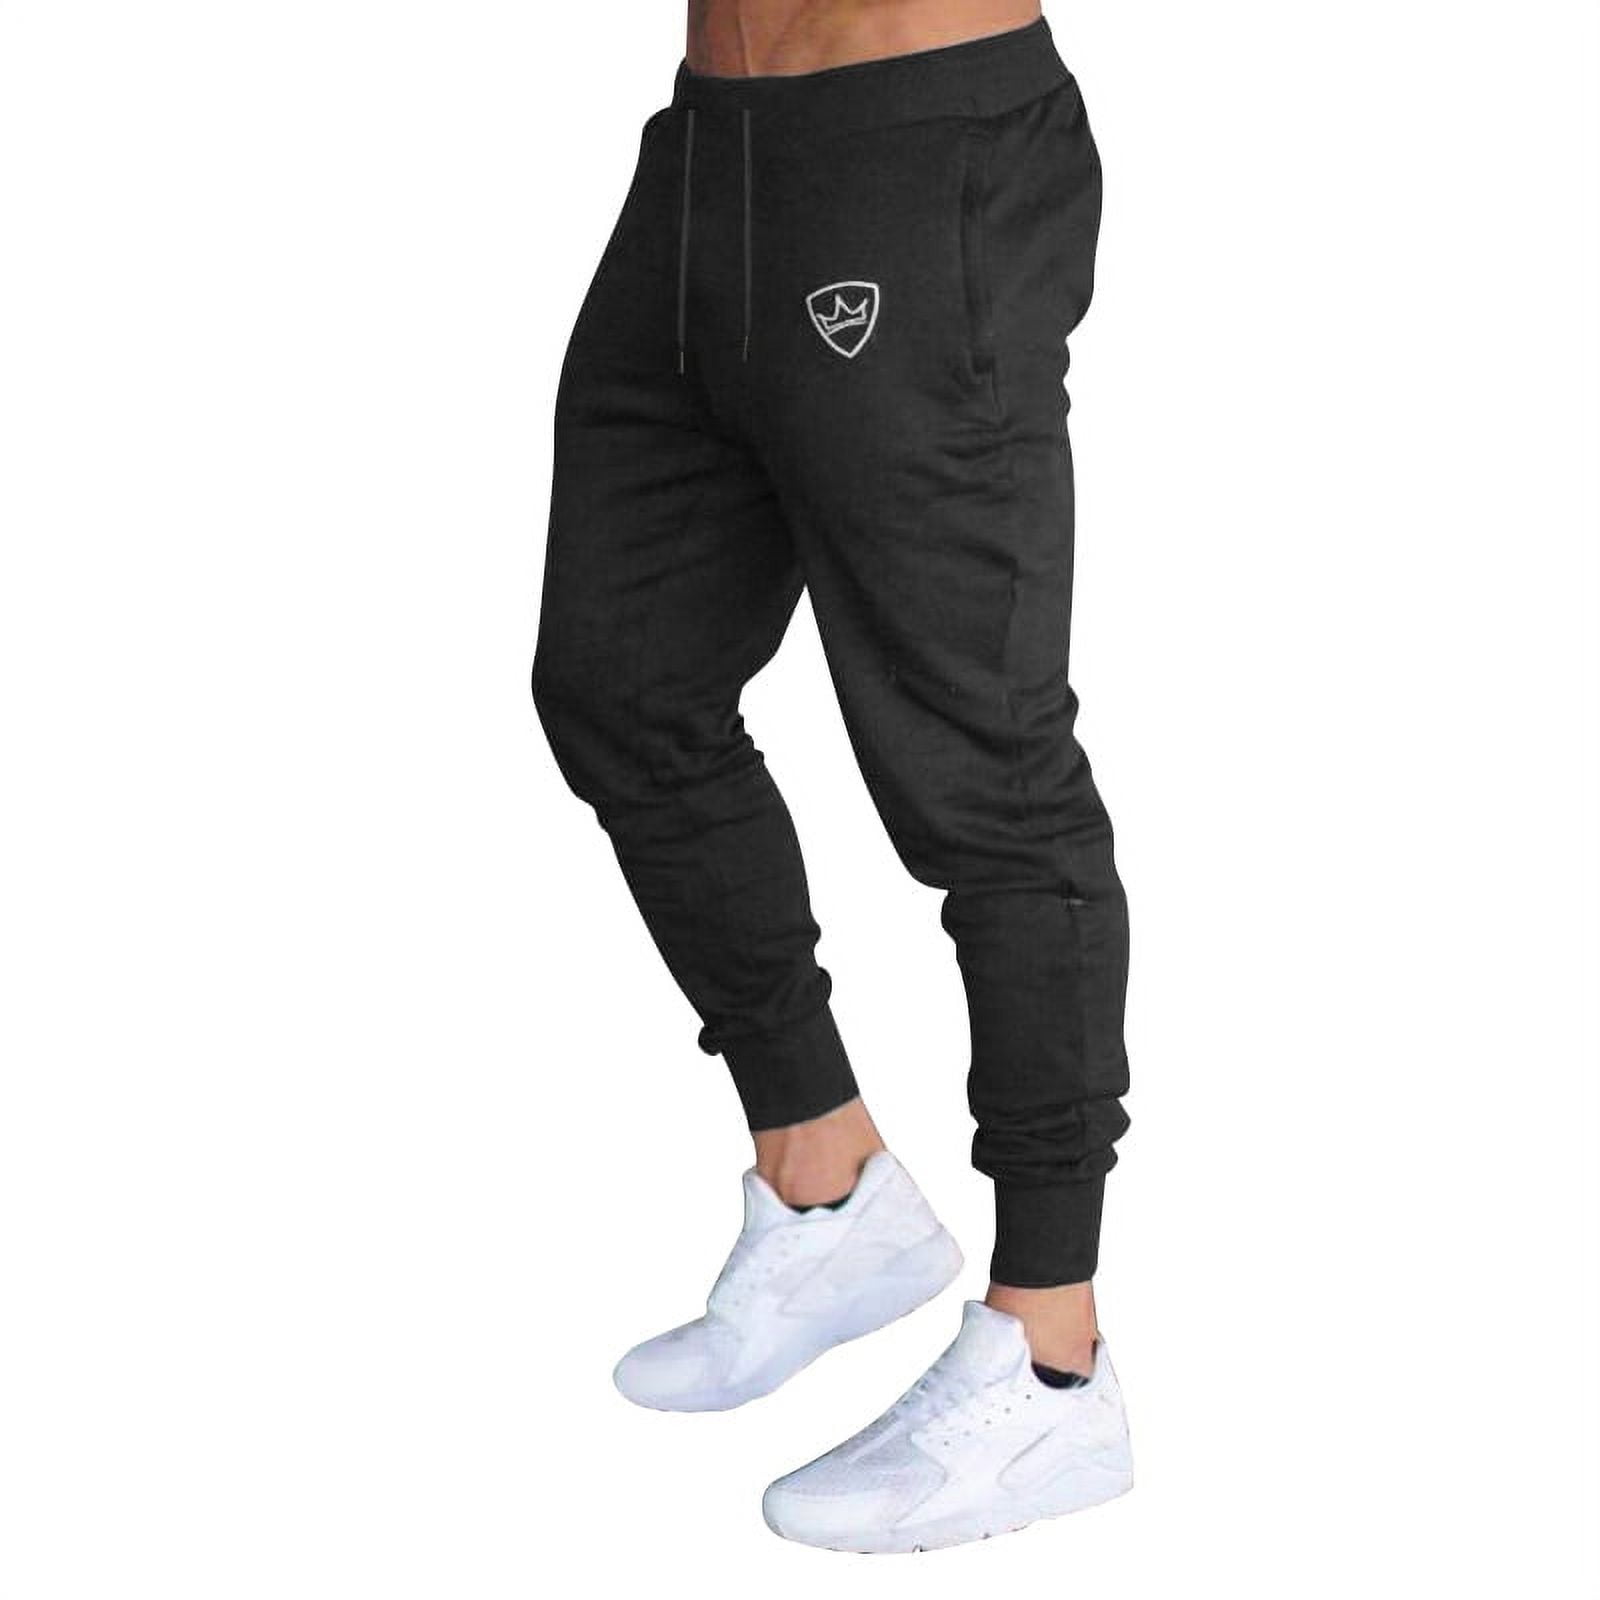 Men's Gym Sports Pants Casual Workout Running Jogger Athletic Trouser  Stretch Slim Fit Sweatpants with Pockets